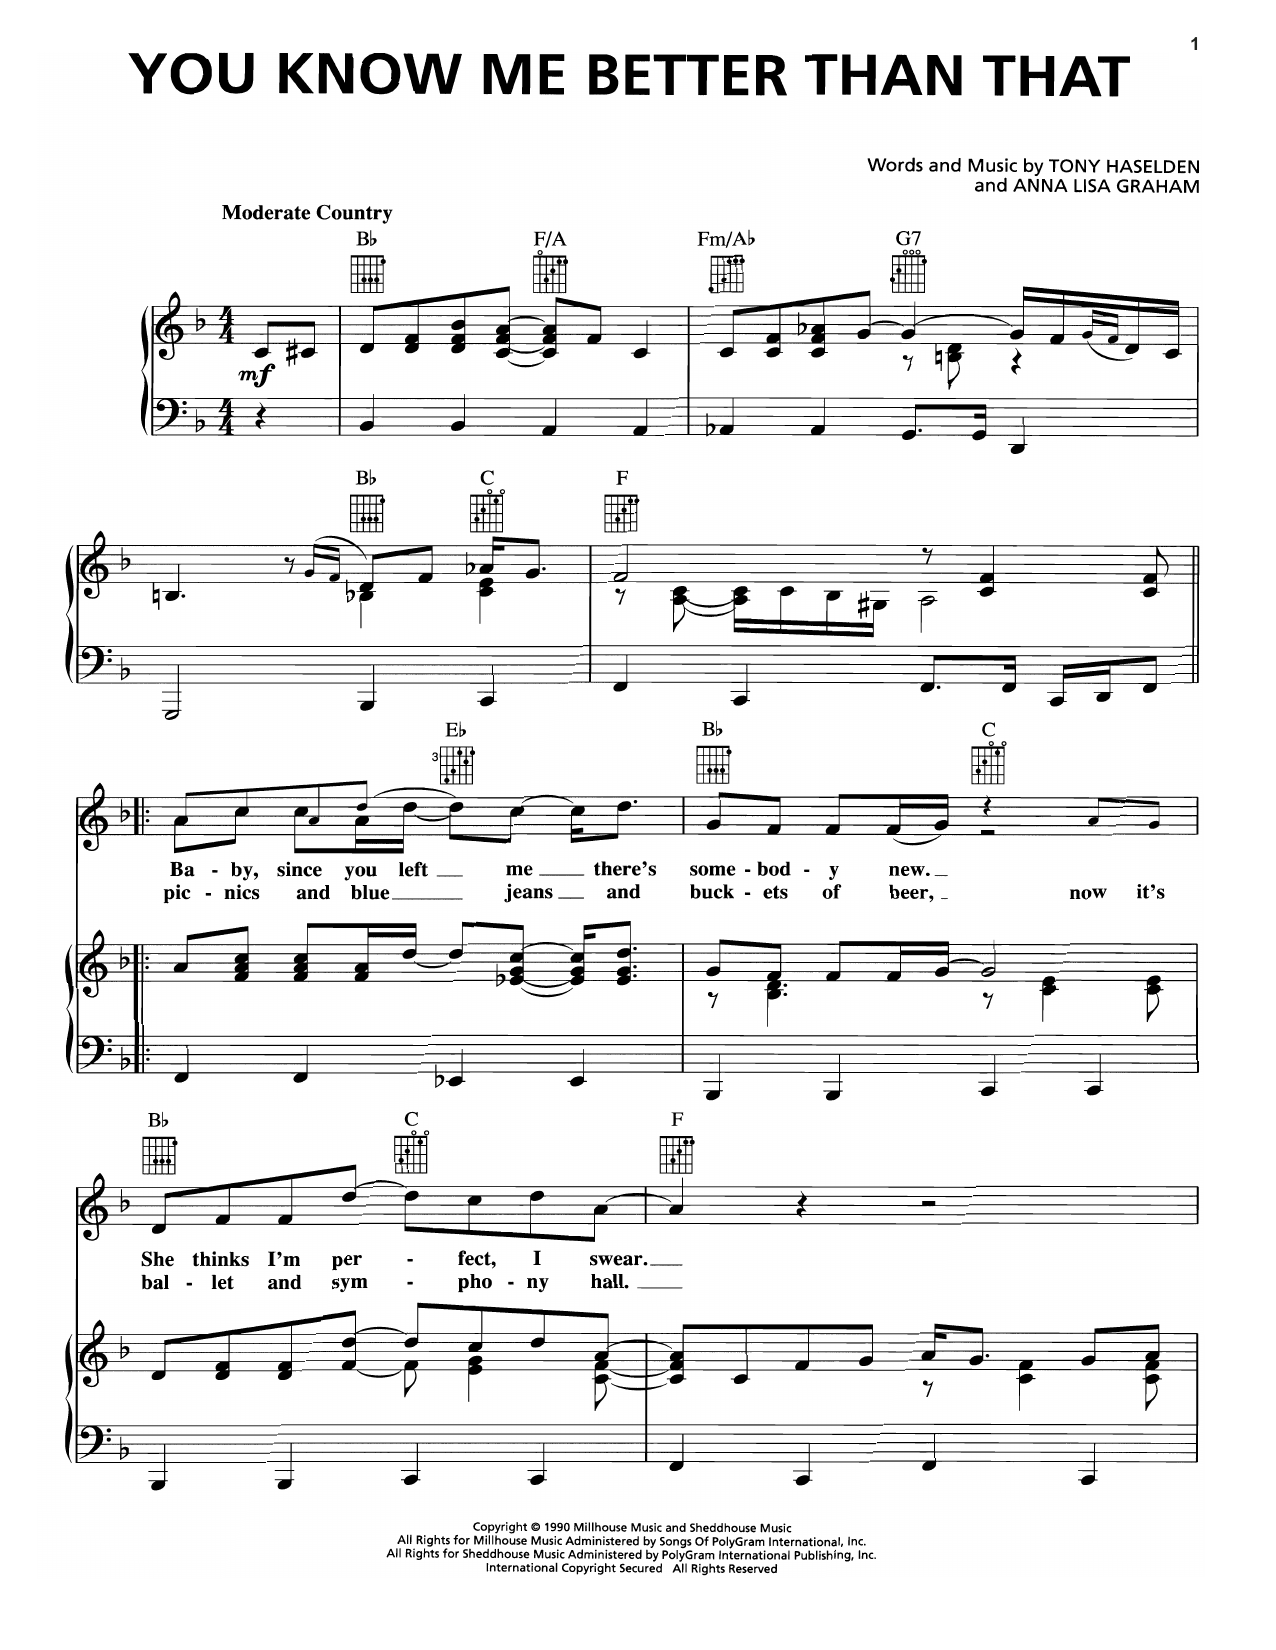 George Strait You Know Me Better Than That sheet music notes and chords. Download Printable PDF.